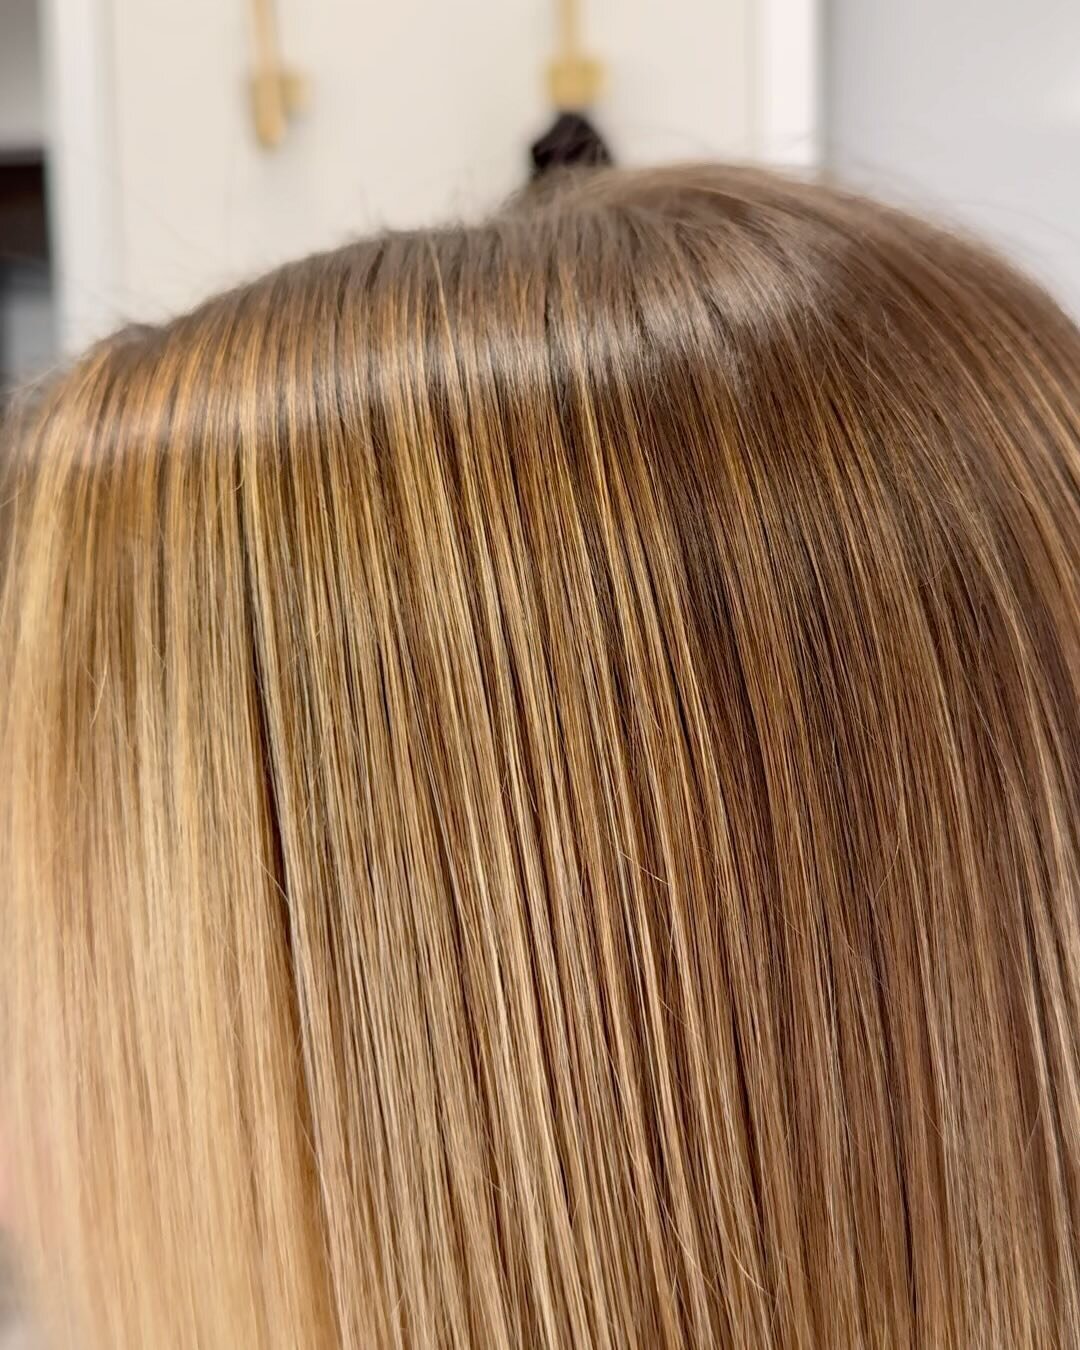 Are you ready for a hair transformation? Look no further than invisible bead extensions! This is simply one row and you can see an instant change. They are  the perfect solution for adding length, volume, and thickness to your hair. Plus, they are vi